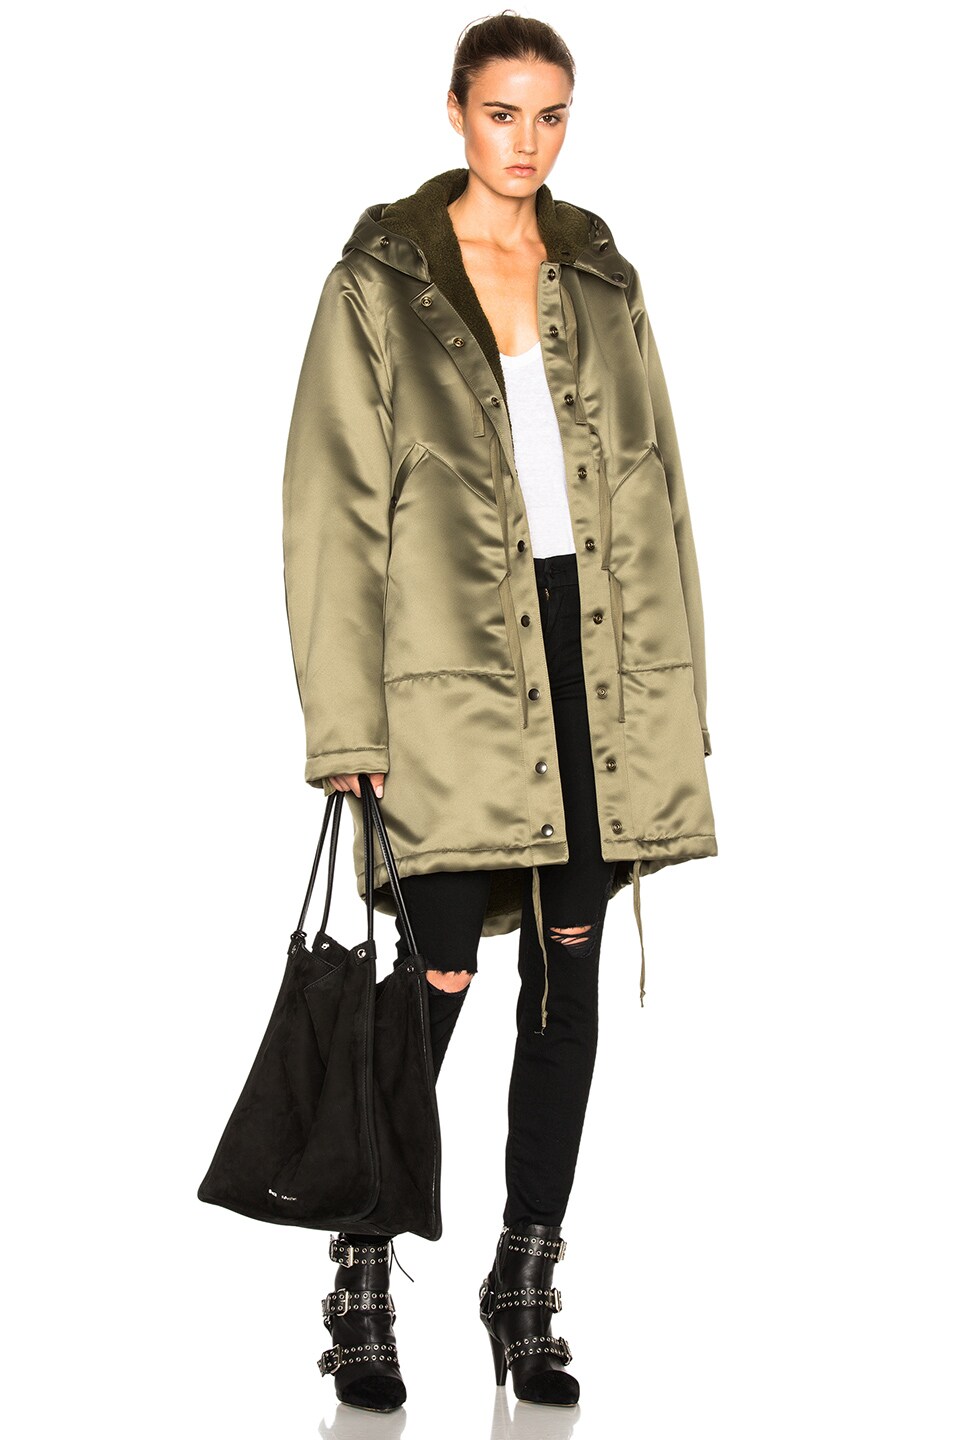 Image 1 of Faith Connexion Sherpa Lined Parka Jacket in Army Khaki